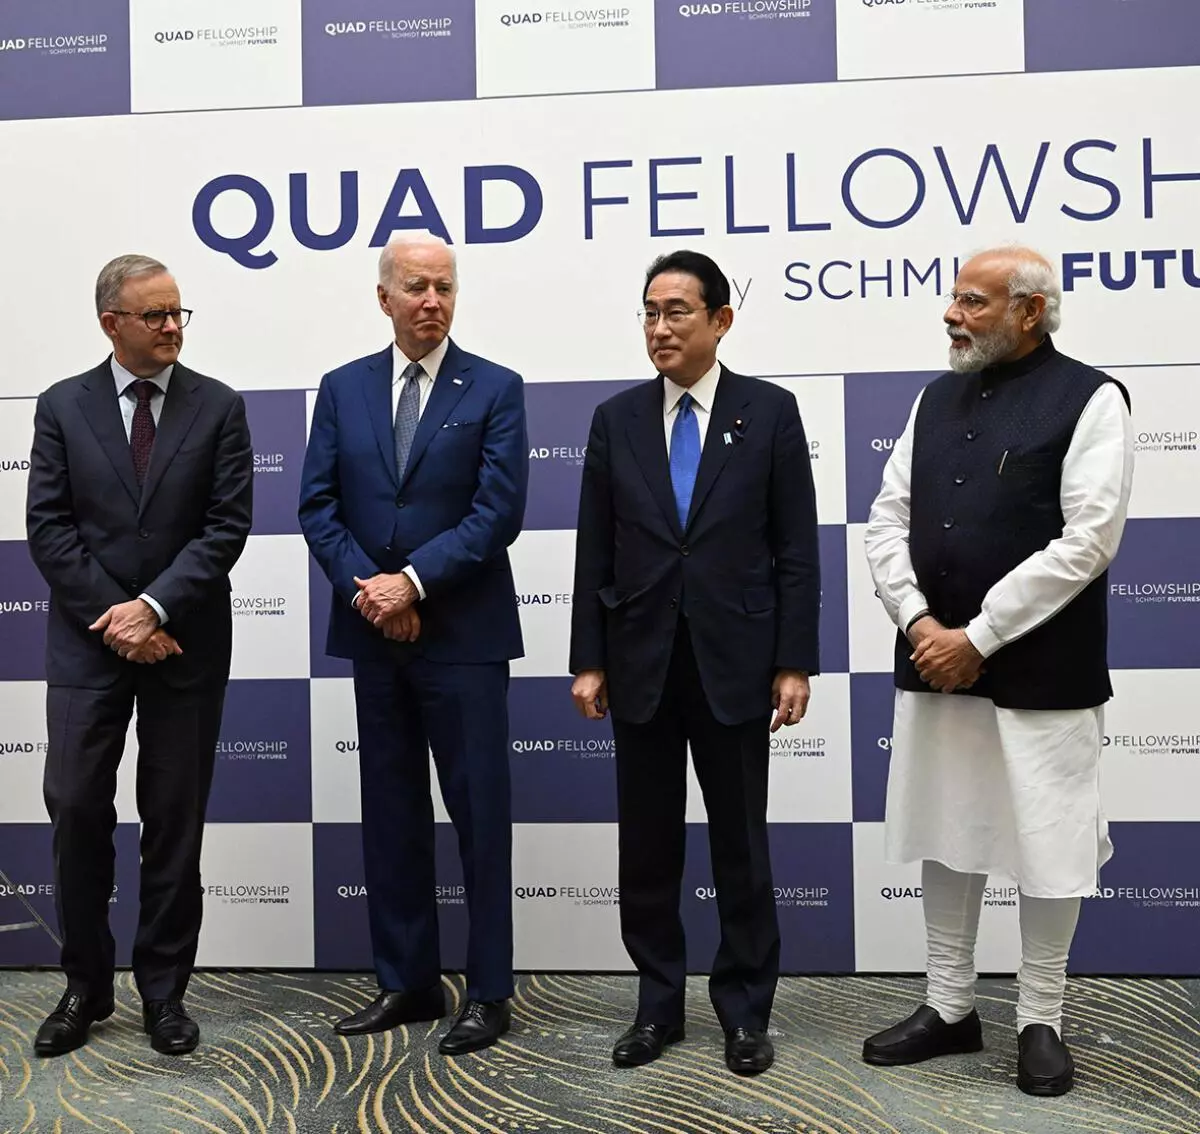 A file photo of Australian Prime Minister Anthony Albanese, US President Joe Biden, Japanese Prime Minister Fumio Kishida, Indian Prime Minister Narendra Modi  during the Quad Leaders Summit at Kantei in Tokyo in May 2022